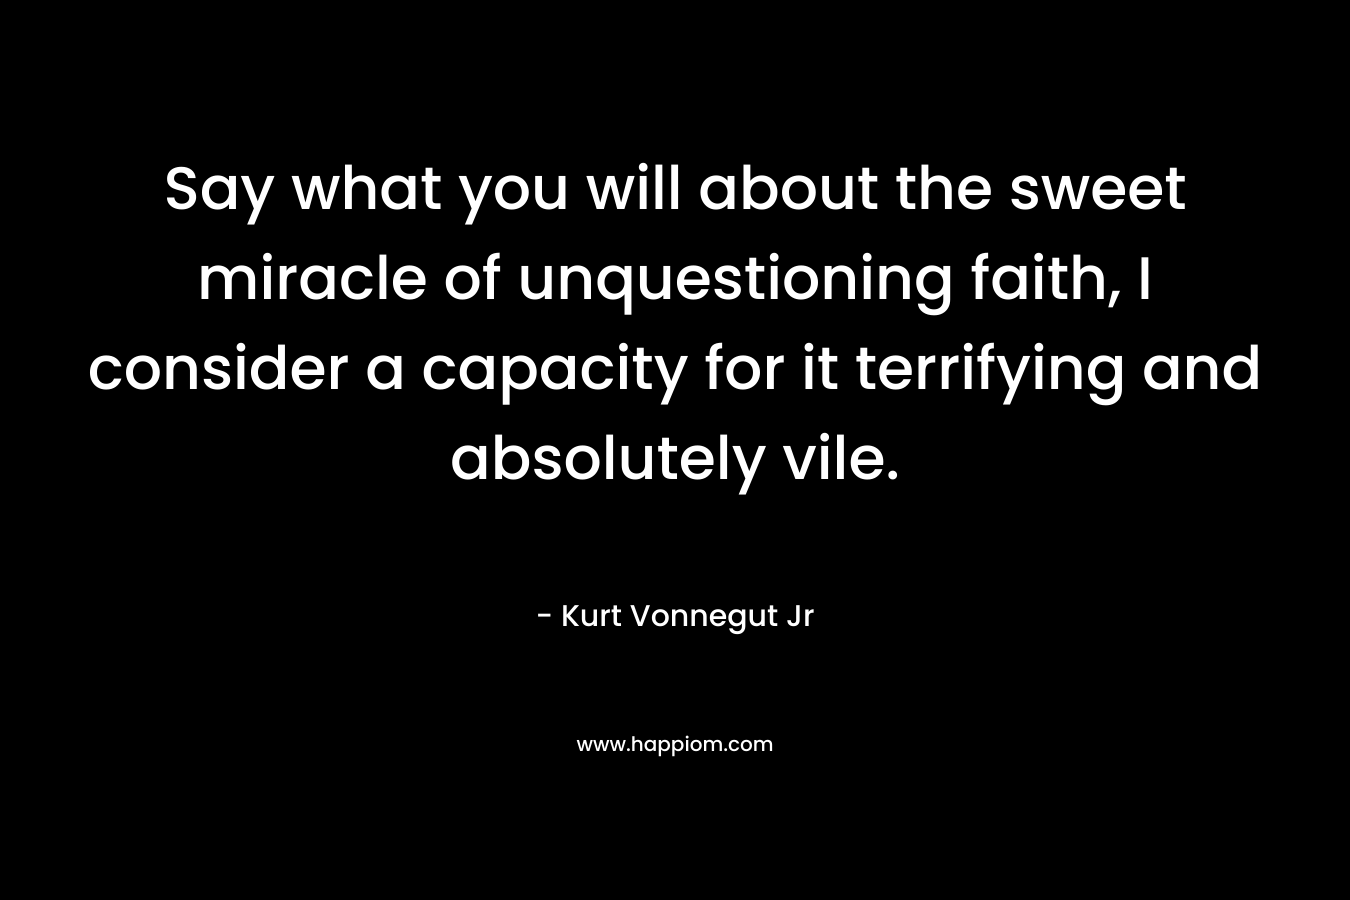 Say what you will about the sweet miracle of unquestioning faith, I consider a capacity for it terrifying and absolutely vile. – Kurt Vonnegut Jr